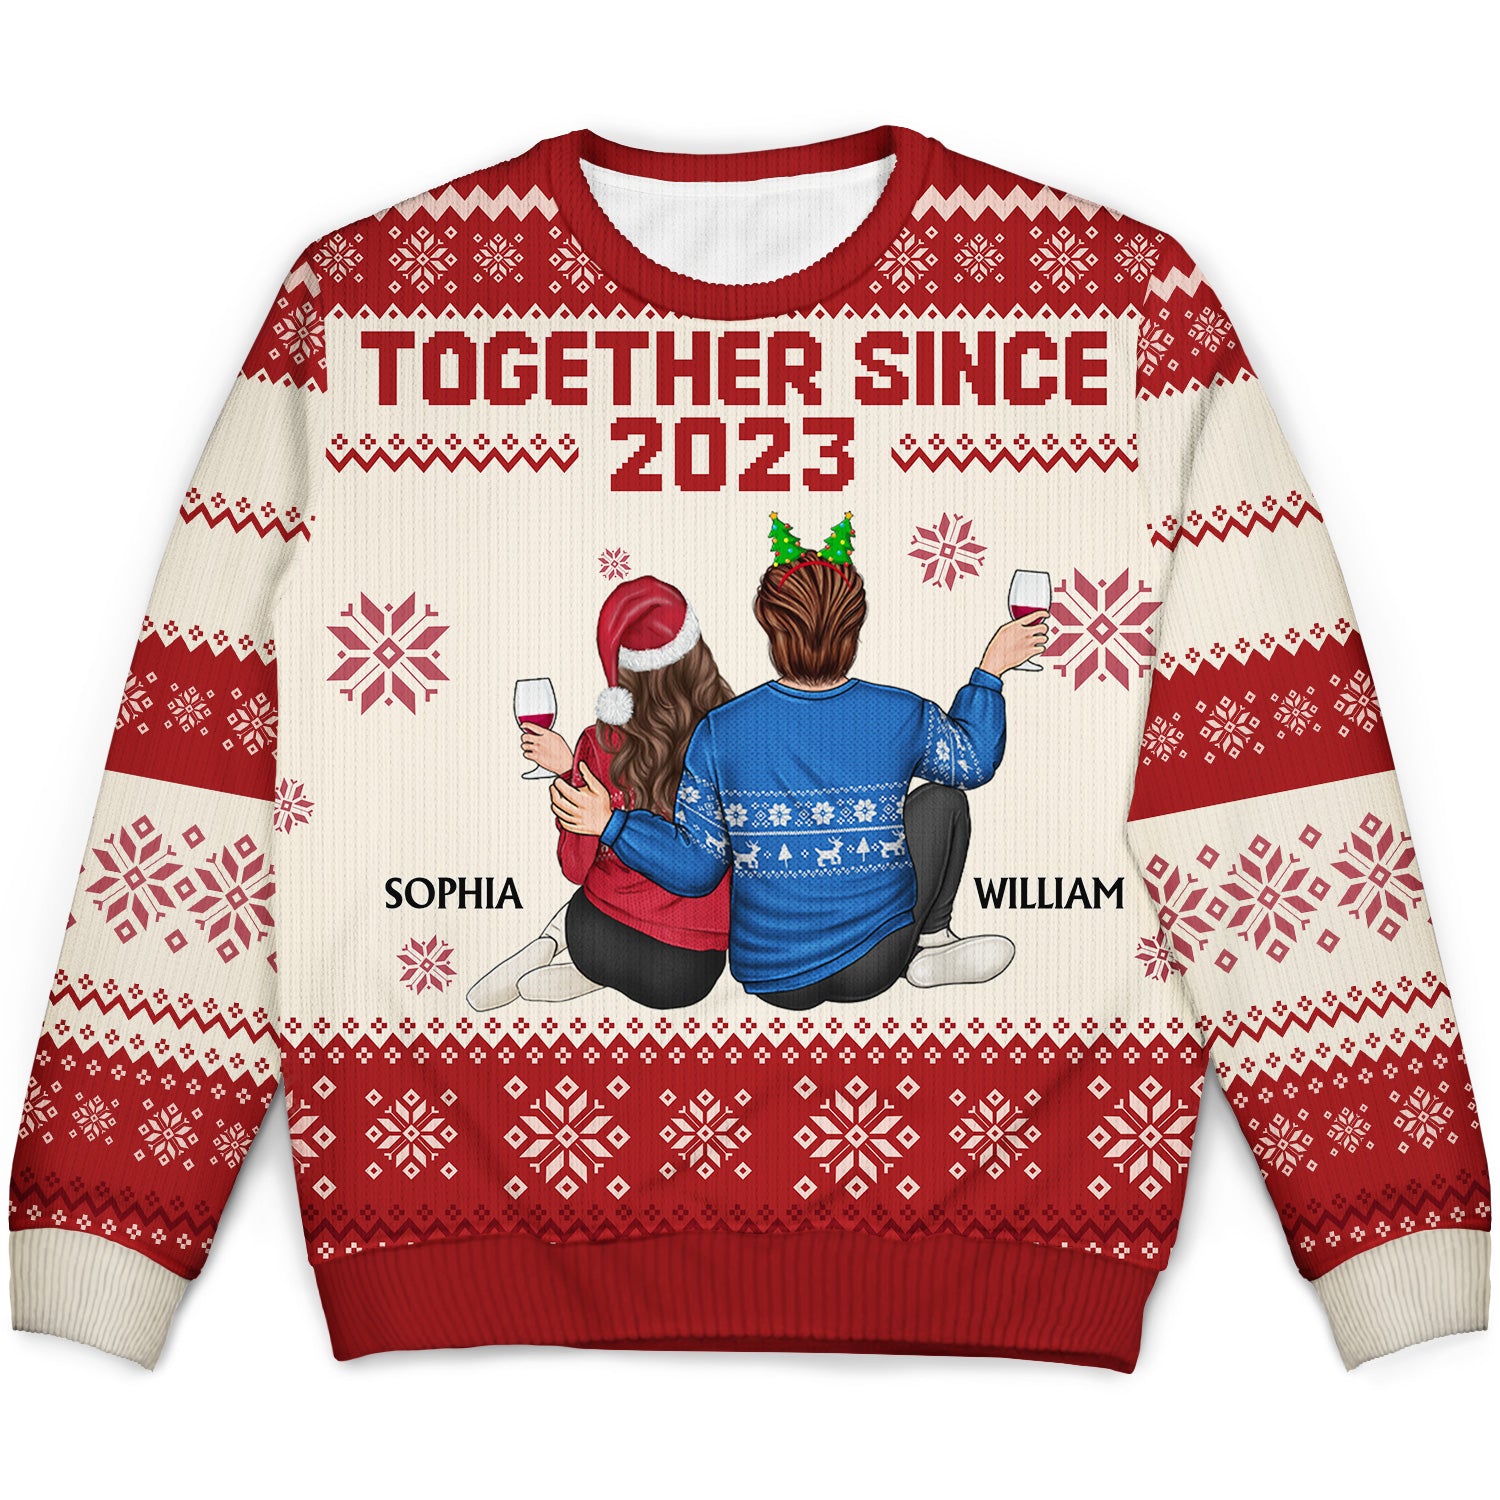 Together Since - Christmas Gift For Couples, Husband, Wife - Personalized Unisex Ugly Sweater